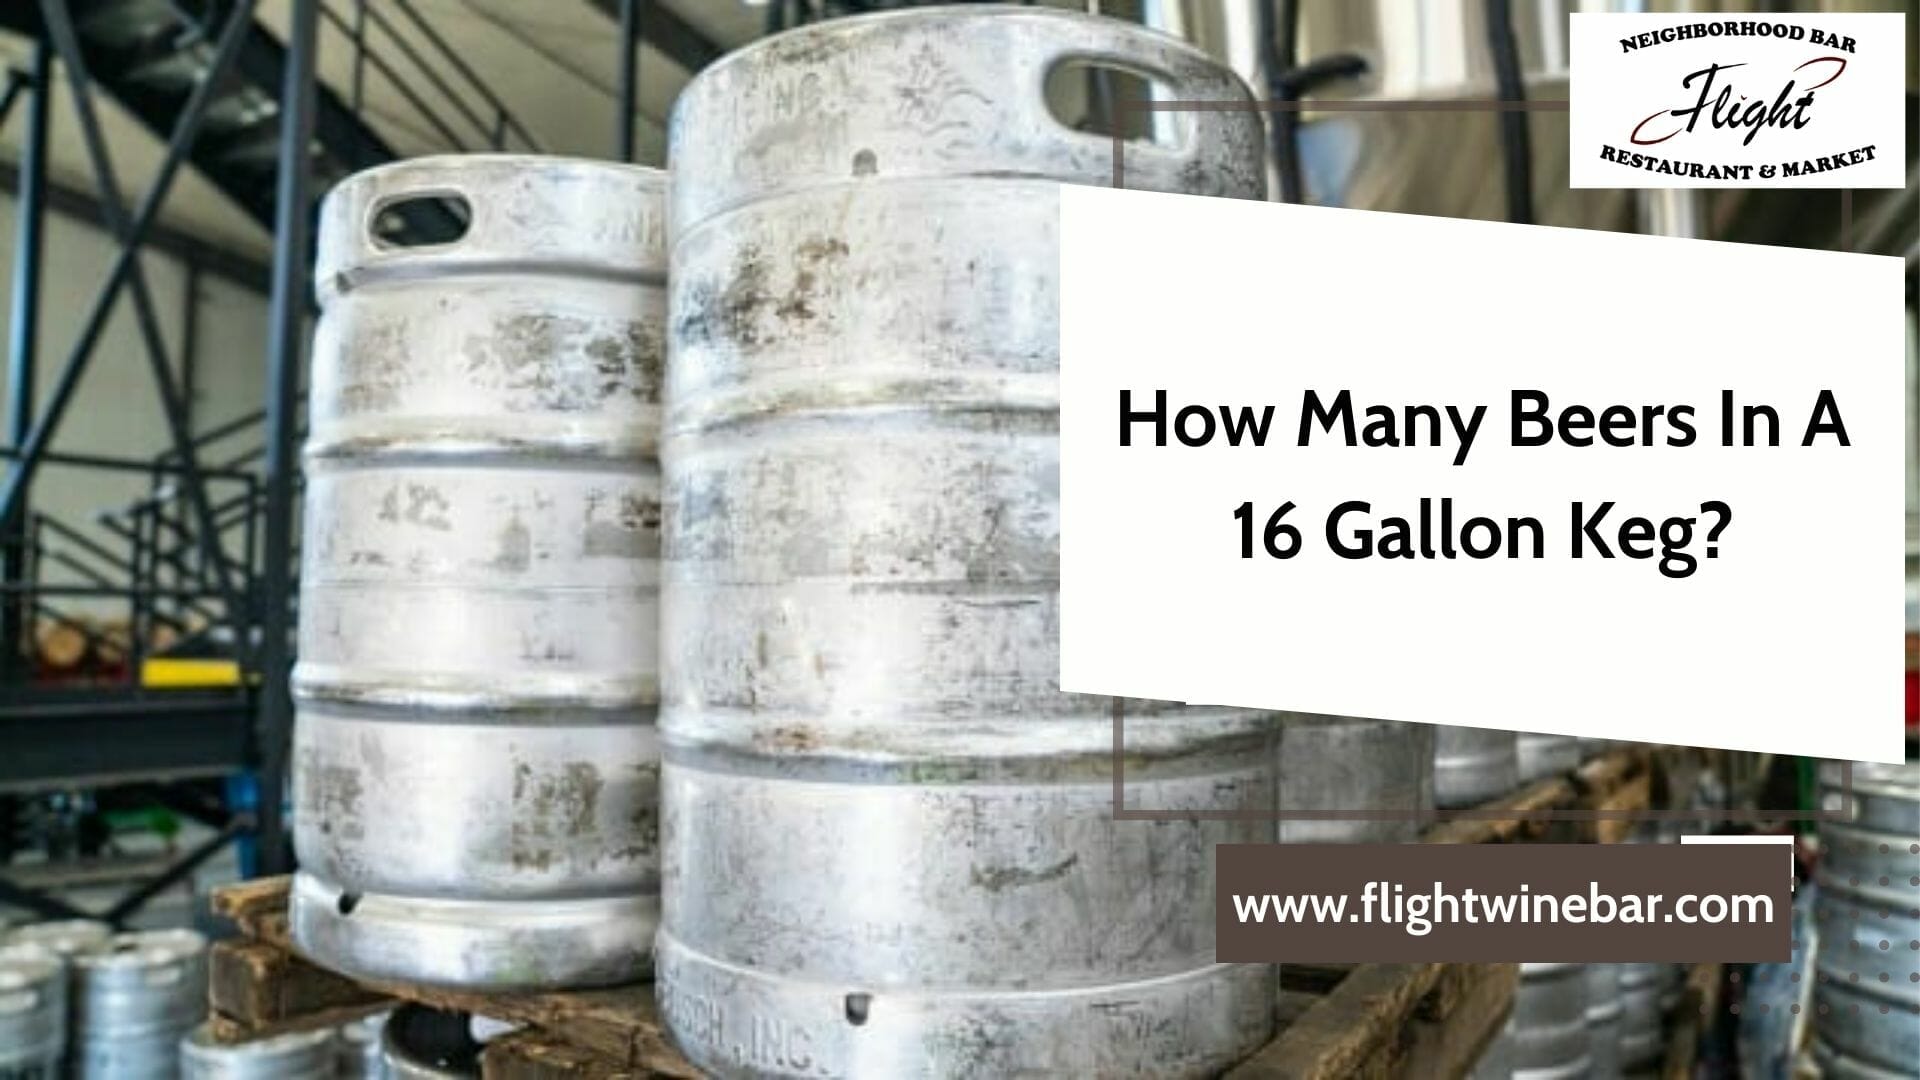 How Many Beers In A 16 Gallon Keg